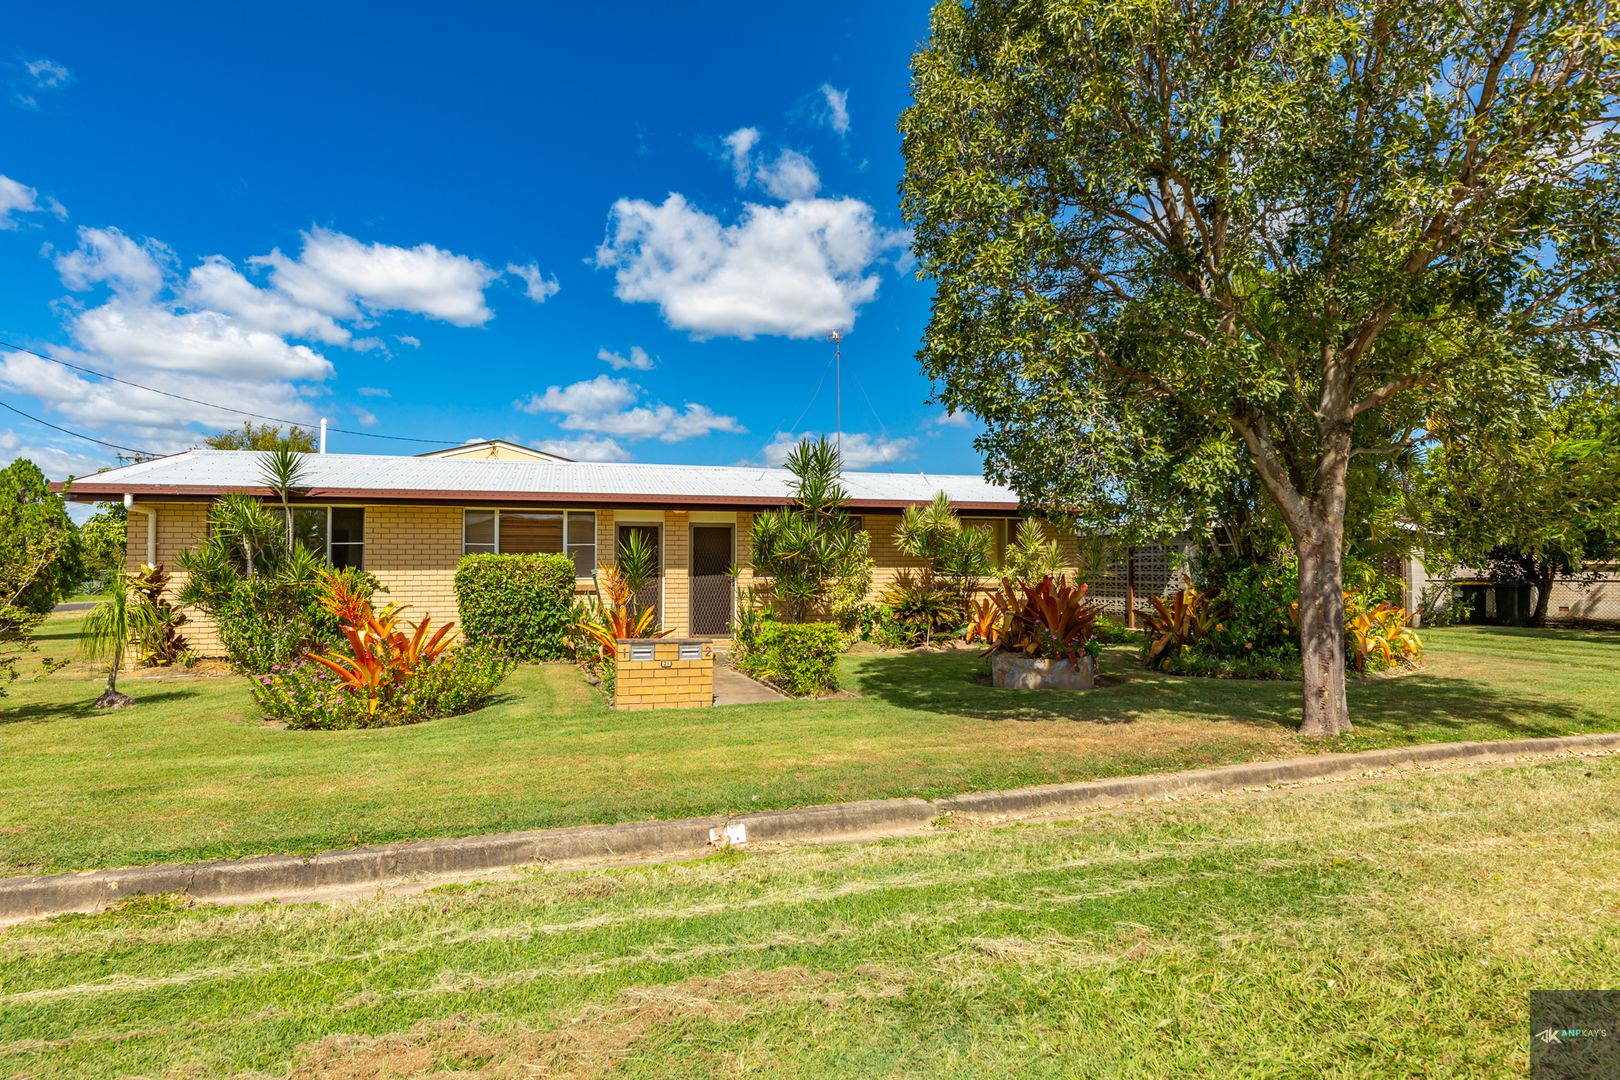 21 WENDT STREET, Millbank QLD 4670, Image 1